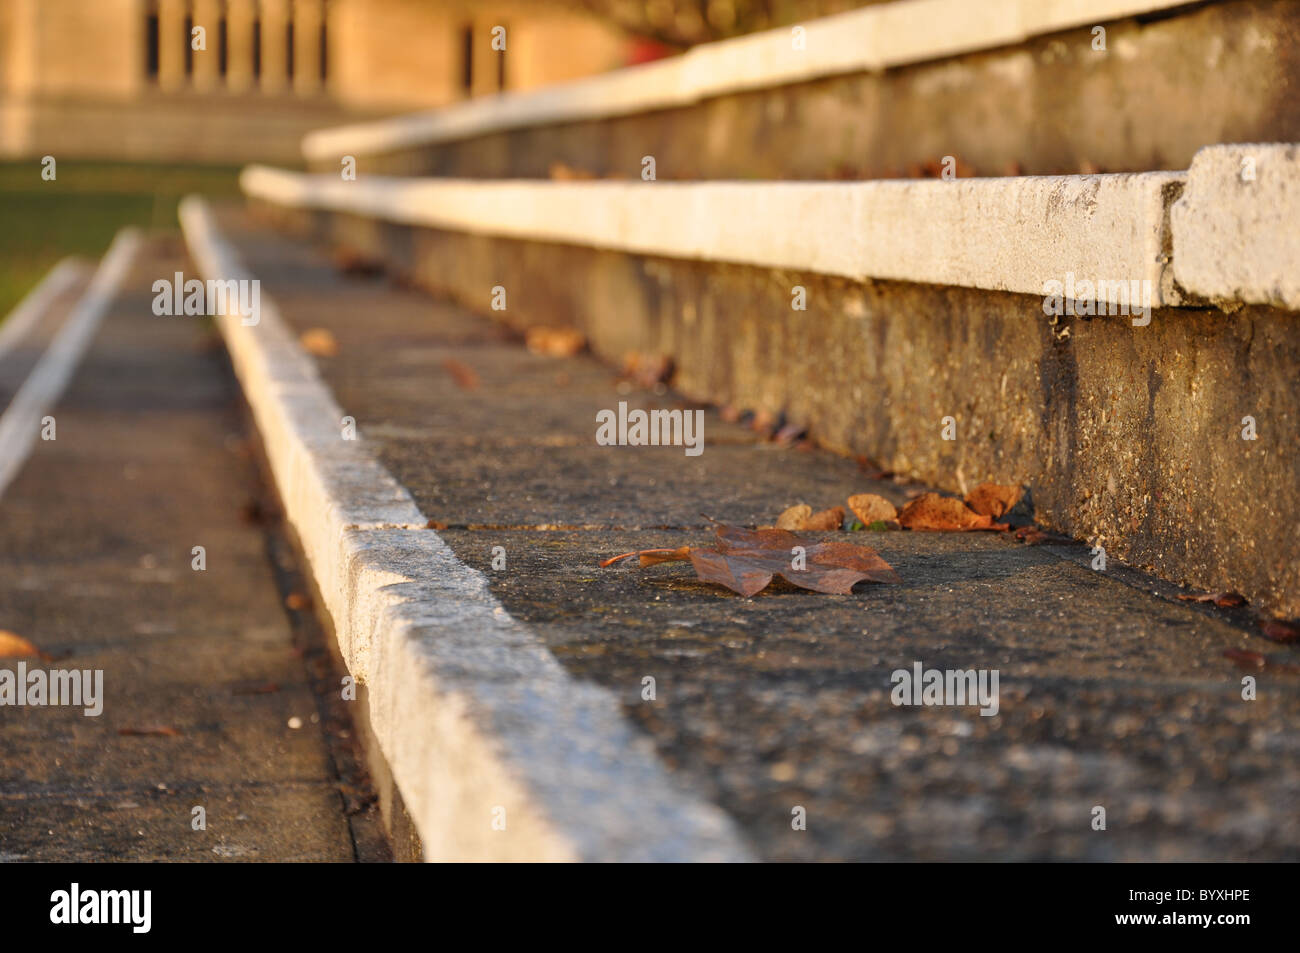 An autumn leaf on some stones steps with white edging leading to a distant view of a period building Stock Photo